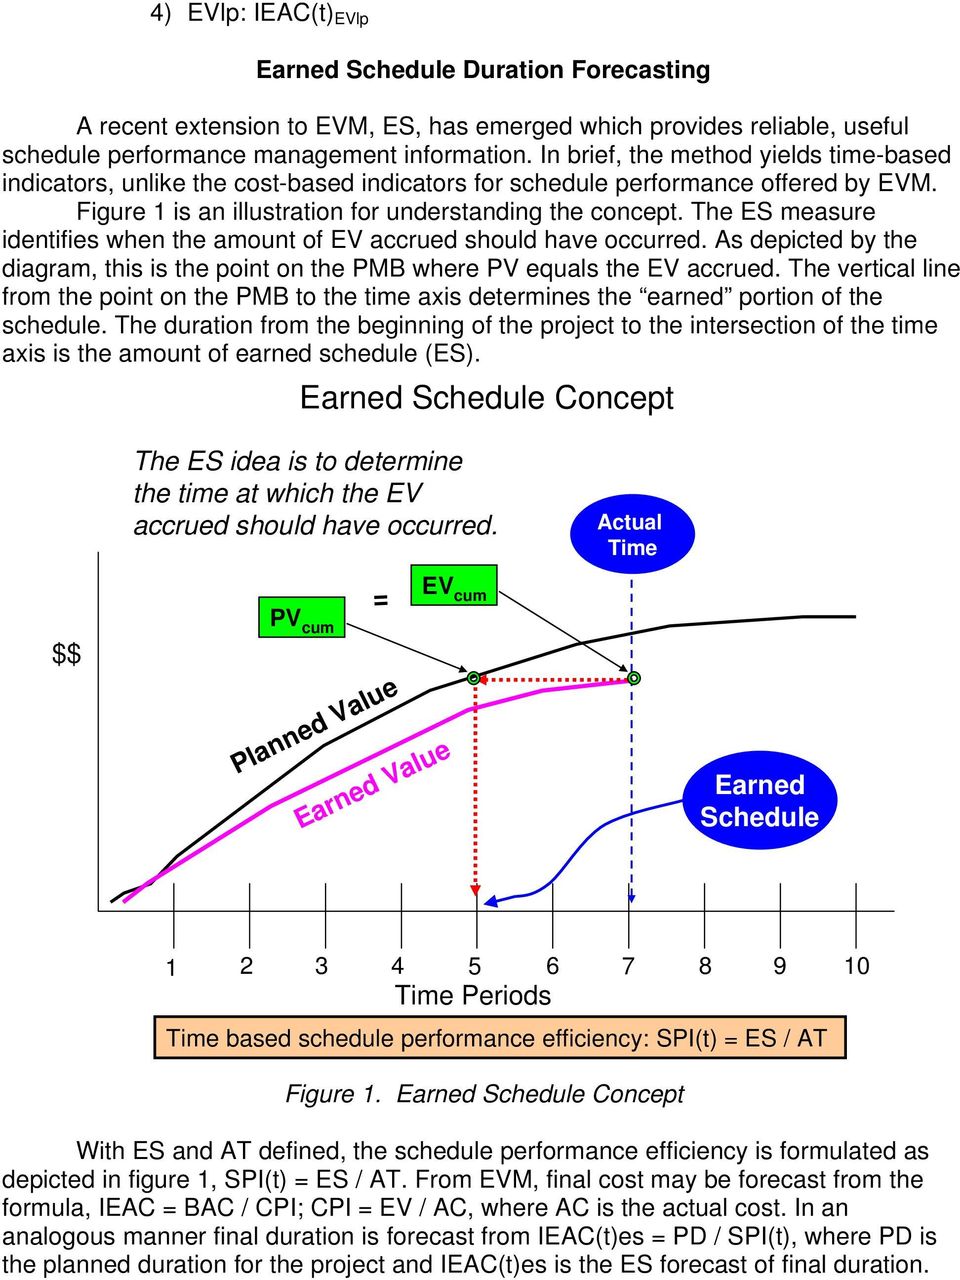 The ES measure identifies when the amount of EV accrued should have occurred. As depicted by the diagram, this is the point on the PMB where PV equals the EV accrued.